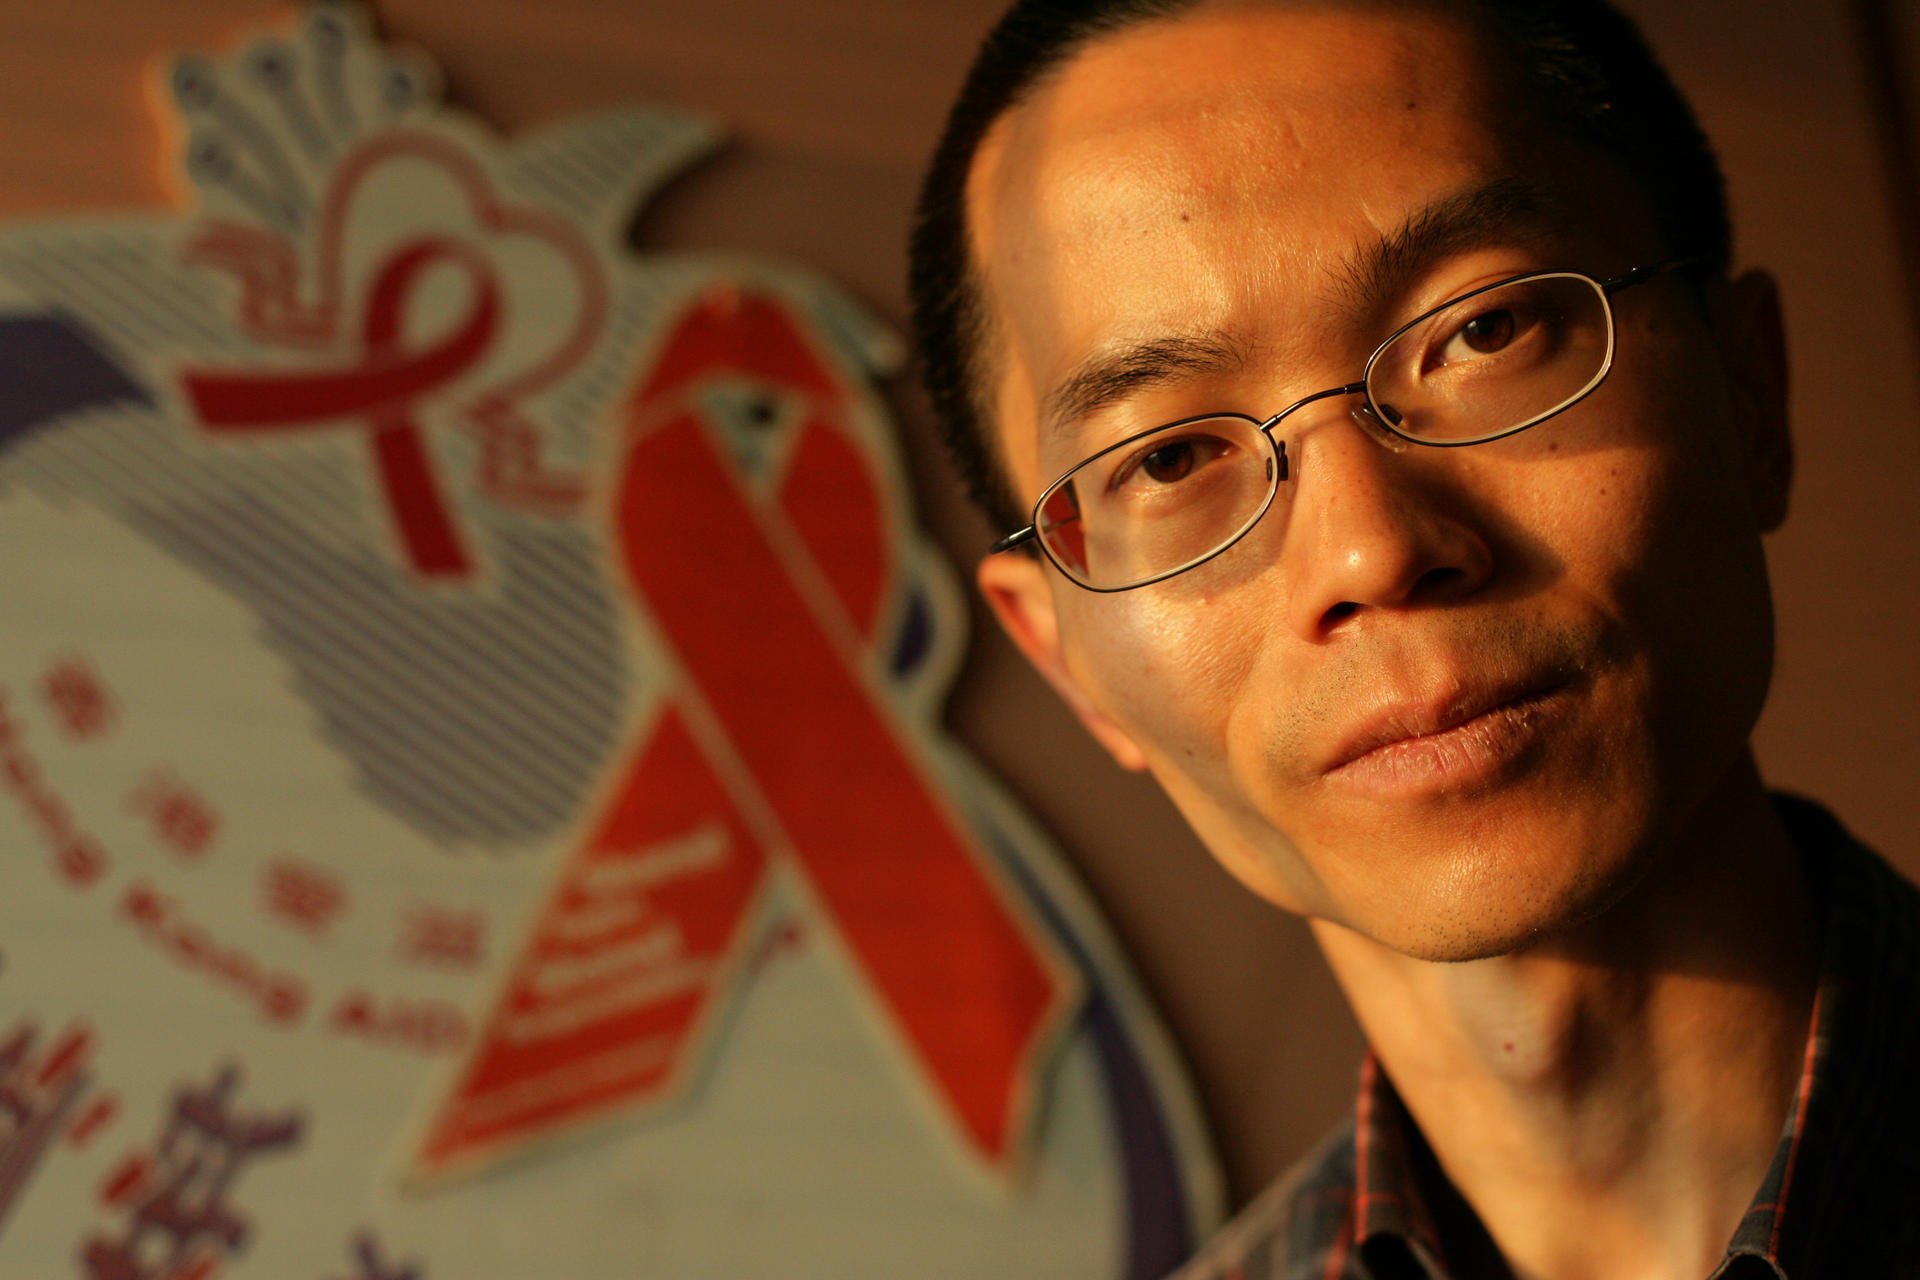 Only four reported cases in the world, says Dr Wong Ka-hing